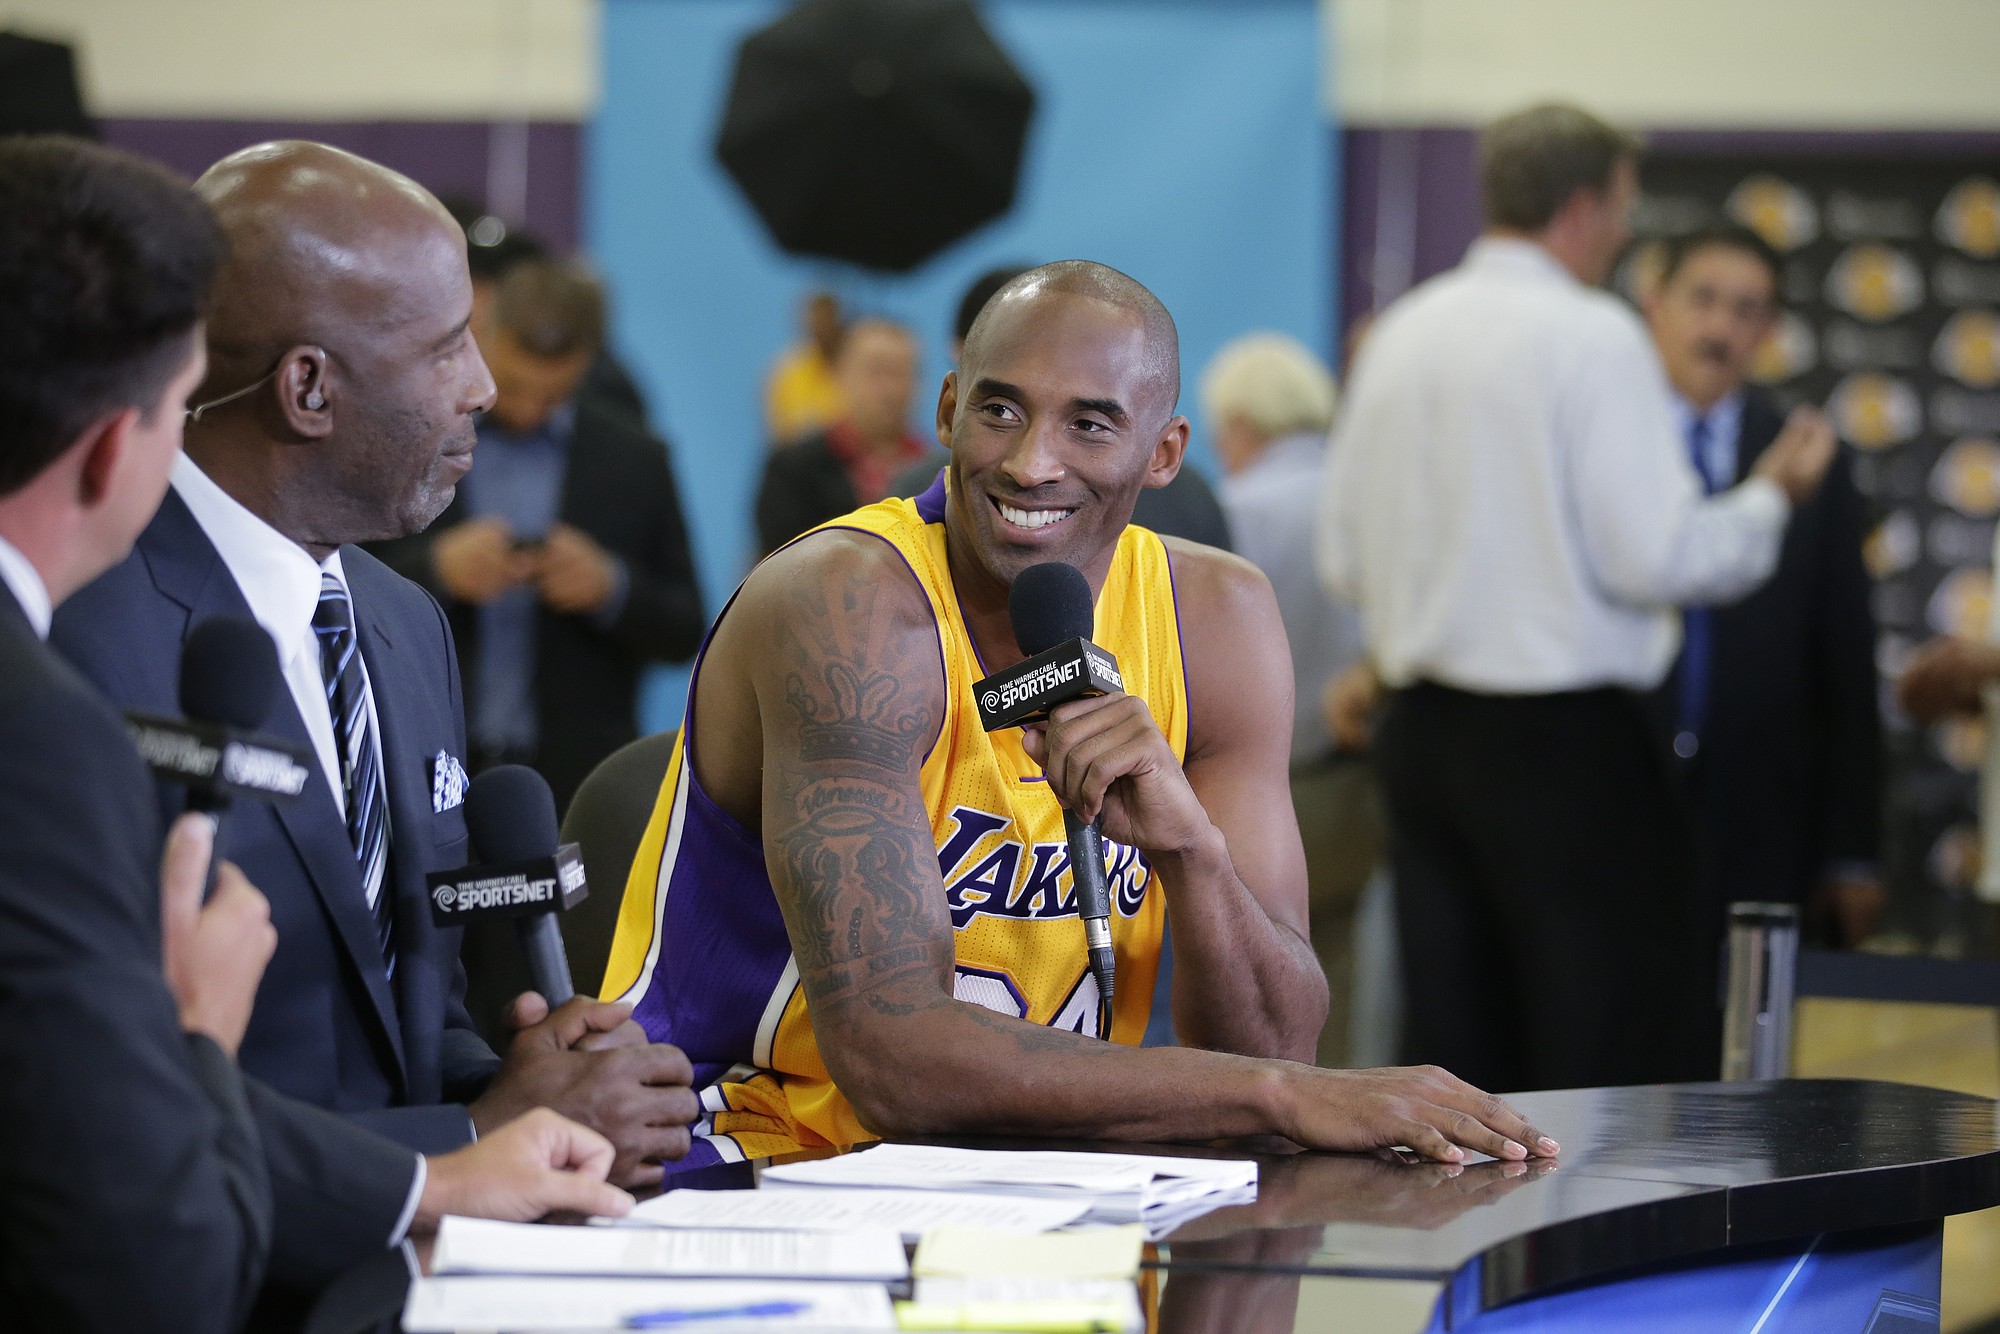 Los Angeles Lakers' Kobe Bryant, center, talks to former NBA star James Worthy during an interview on the team's media day Monday, Sept. 29, 2014, in El Segundo, Calif. (AP Photo/Jae C.